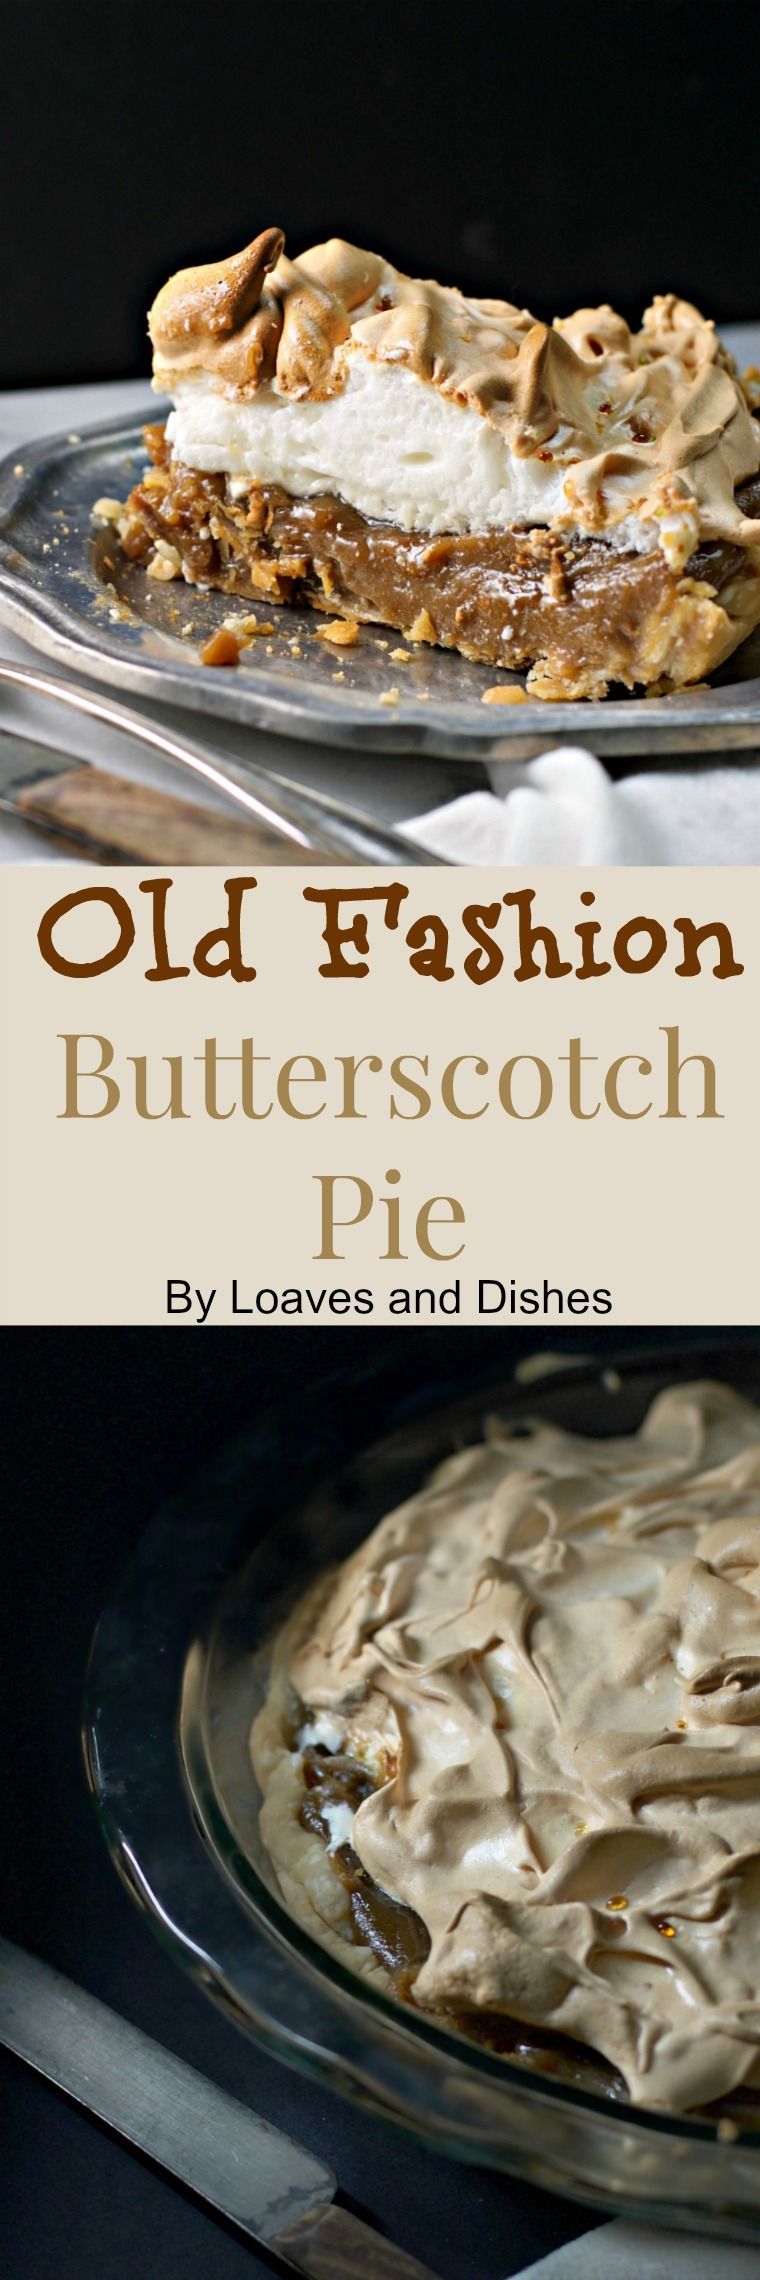 Recipe for Old Fashion Butterscotch Pie with easy to follow directions. Few ingredients and simple to make. Love those old